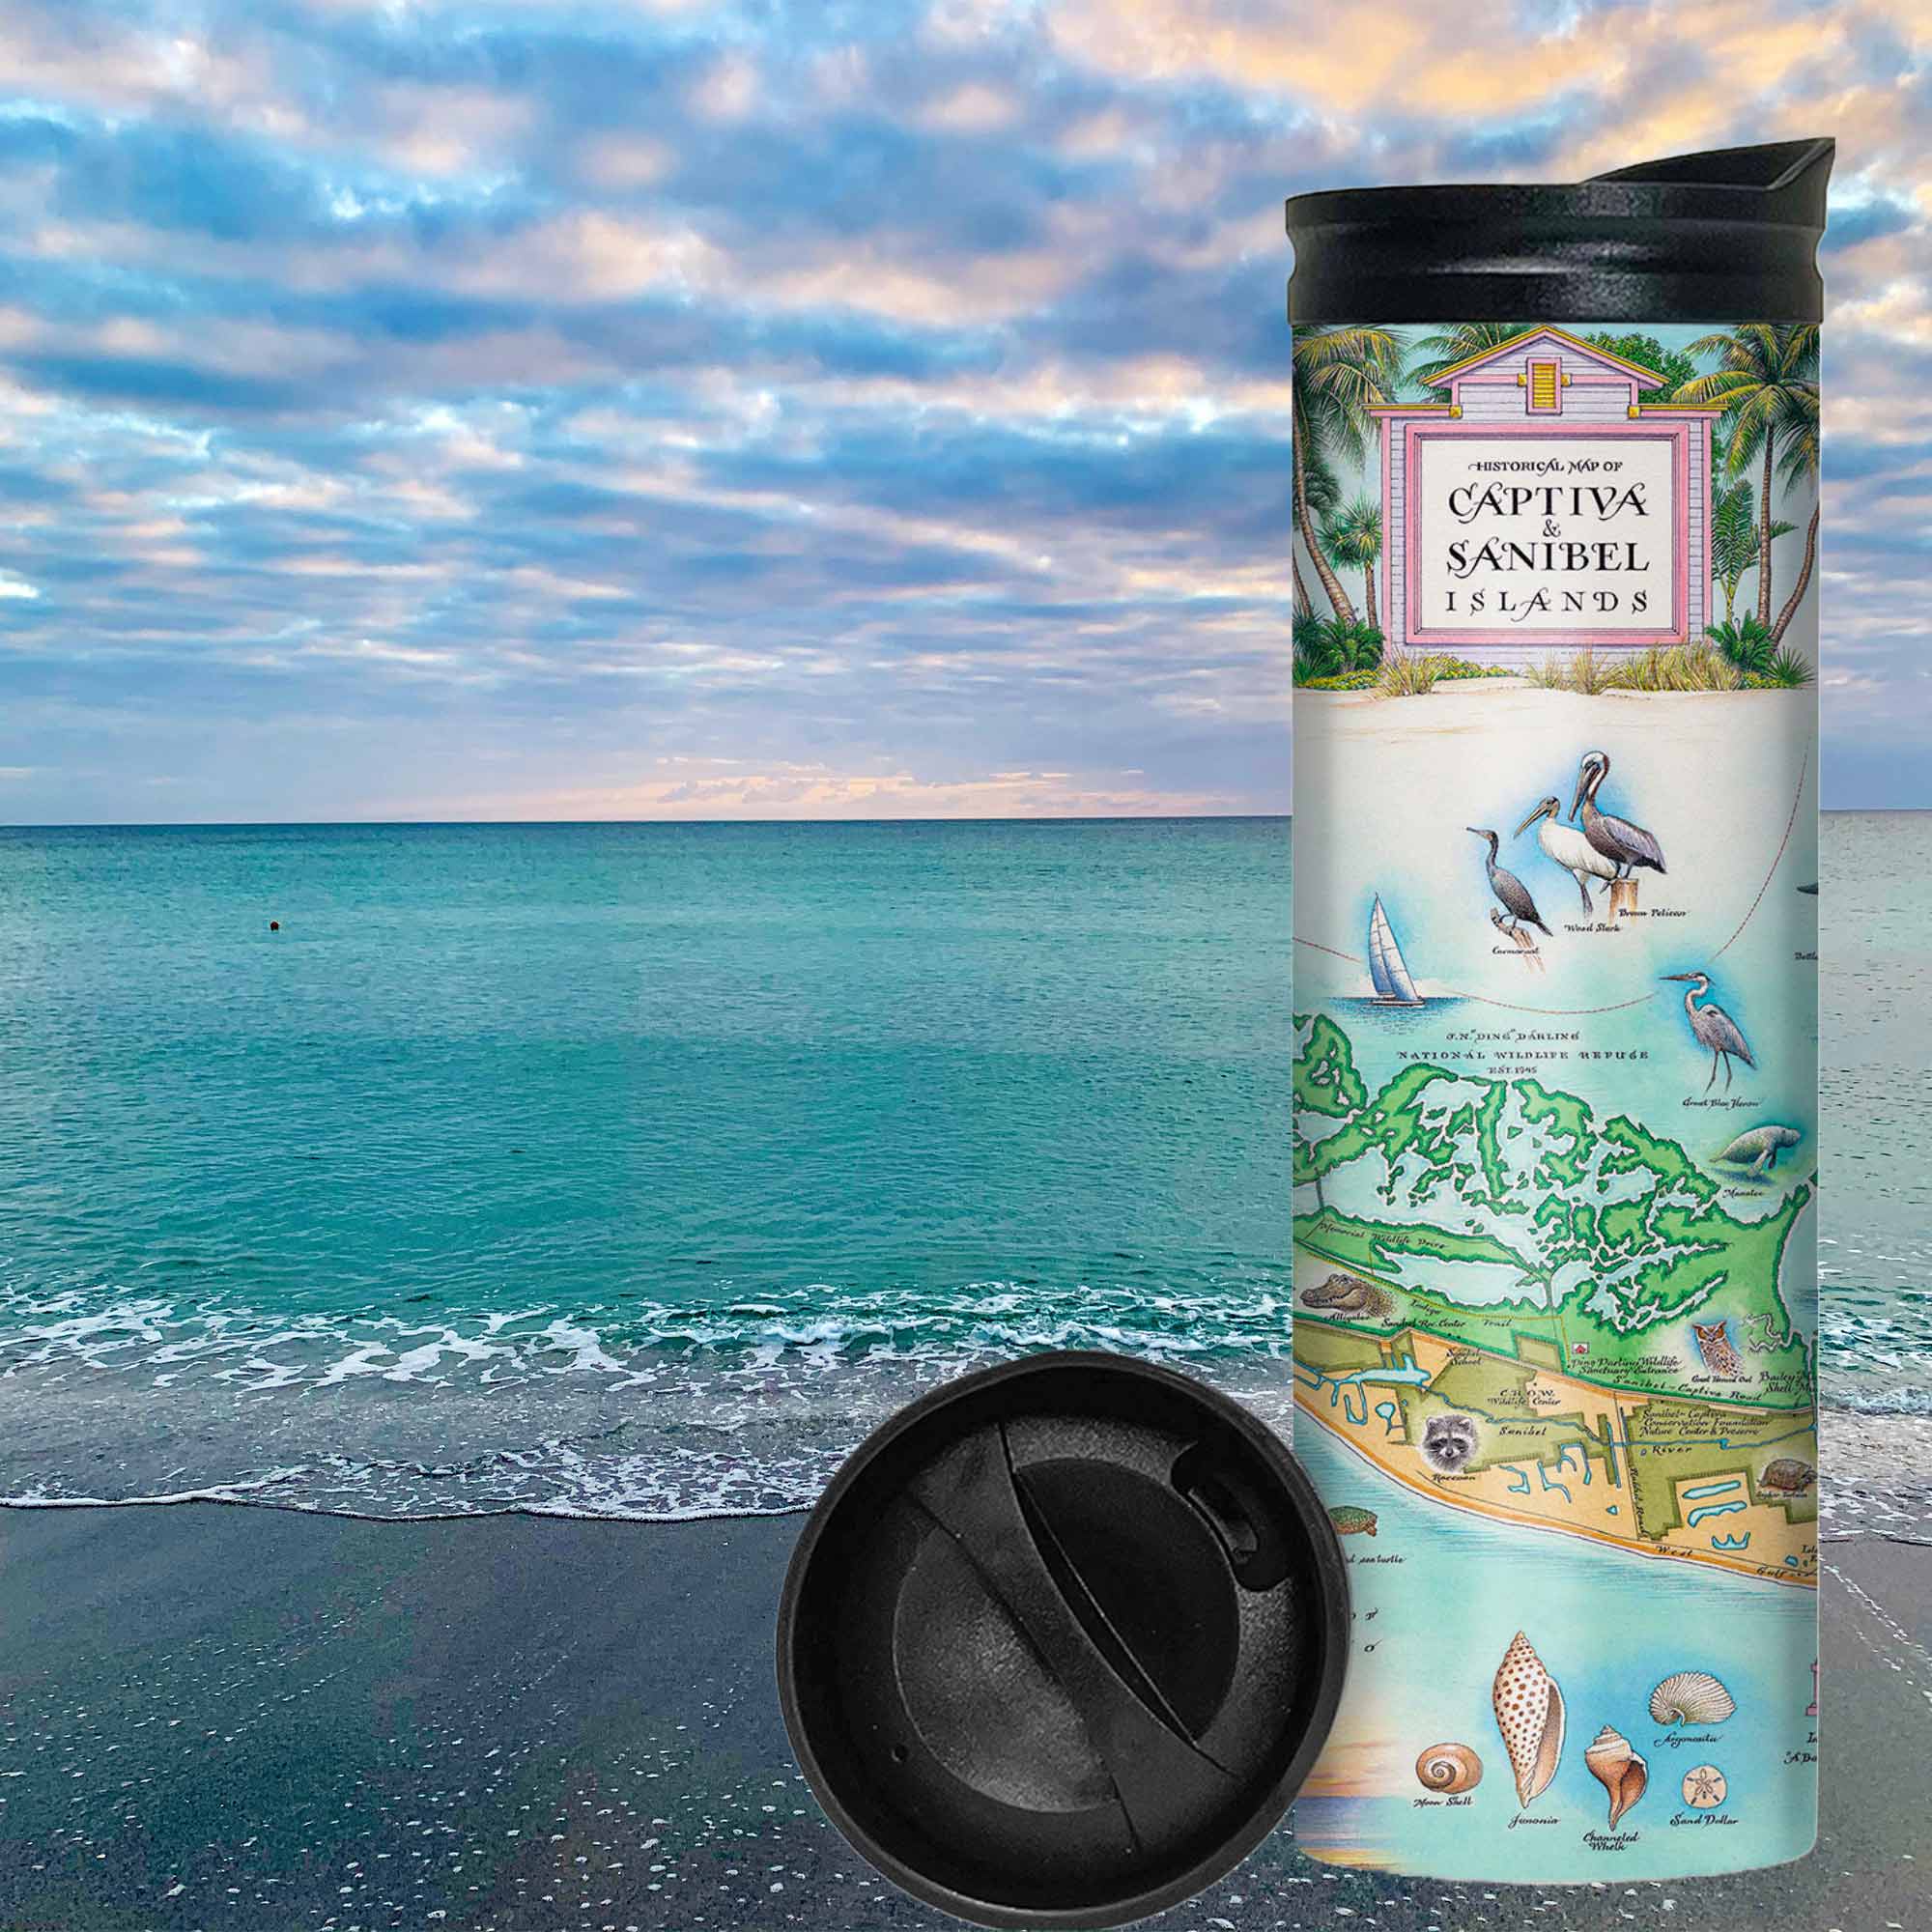 Florida's Sanibel & Captiva Islands Map Travel Drinkware sitting on a beach with ocean and clouds in the background. The map features illustrations of places such as Ding Darling Wildlife Sanctuary, Bailey-Matthews Shell Museum, and Sanibel Lighthouse. Flora and fauna include the Loggerhead sea turtle, Manatee, and Great Blue Heron. Many other birds and sea animals are illustrated.